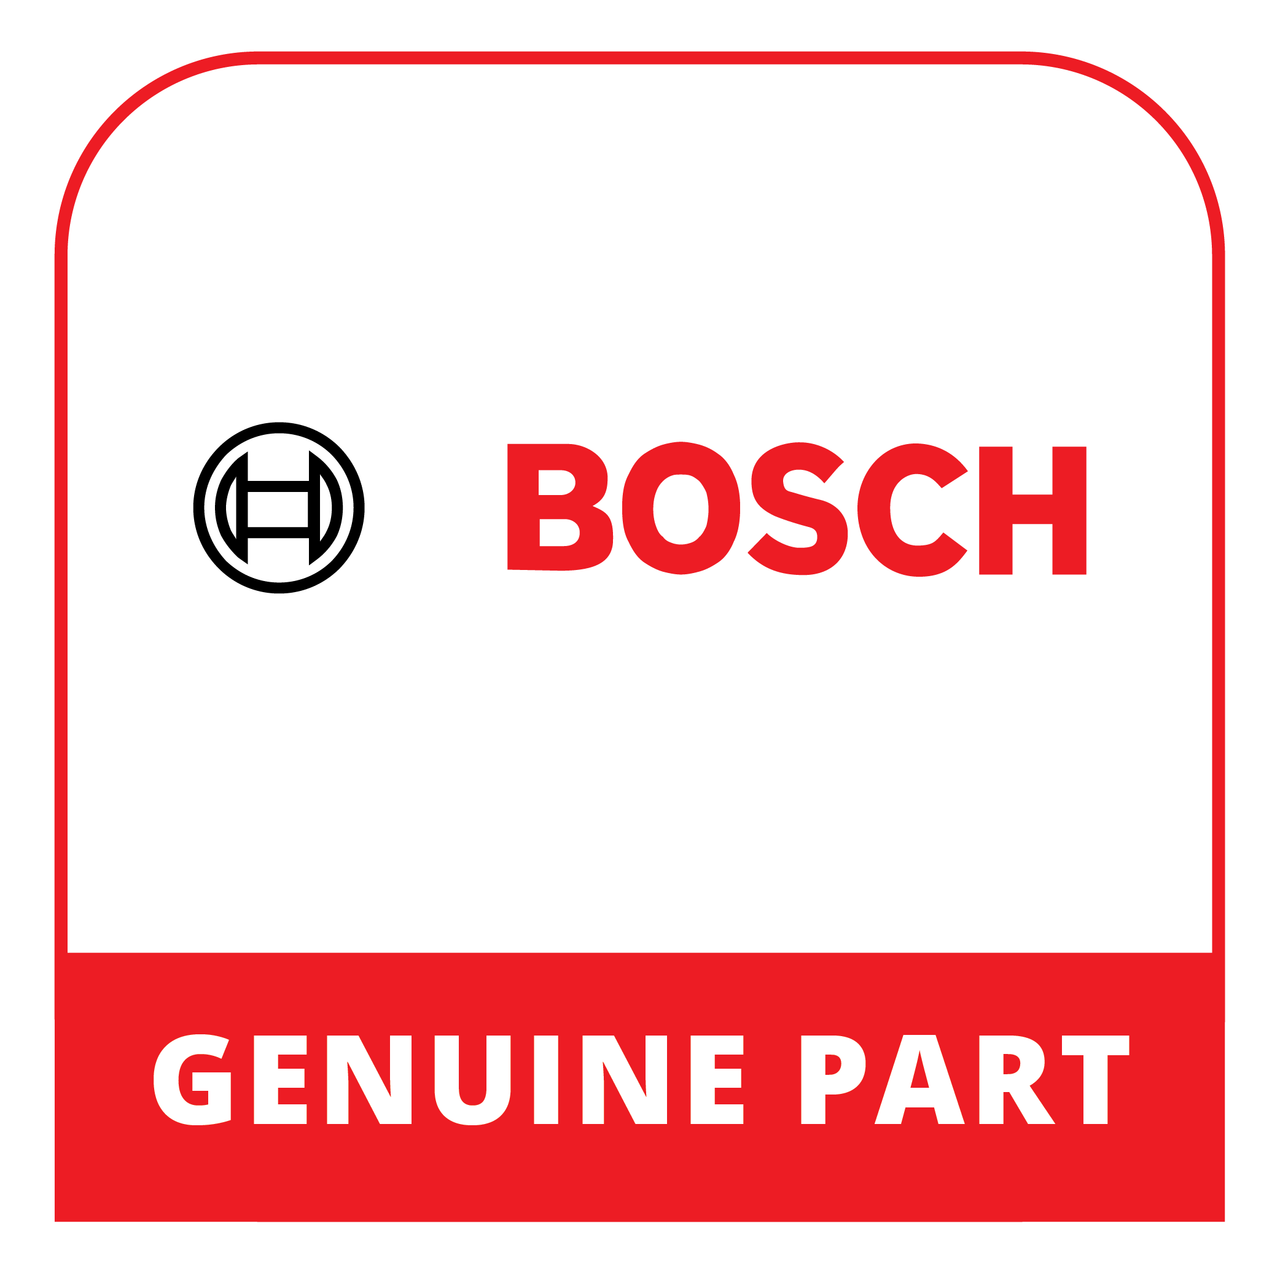 Bosch (Thermador) 11049560 - Float - Genuine Bosch (Thermador) Part